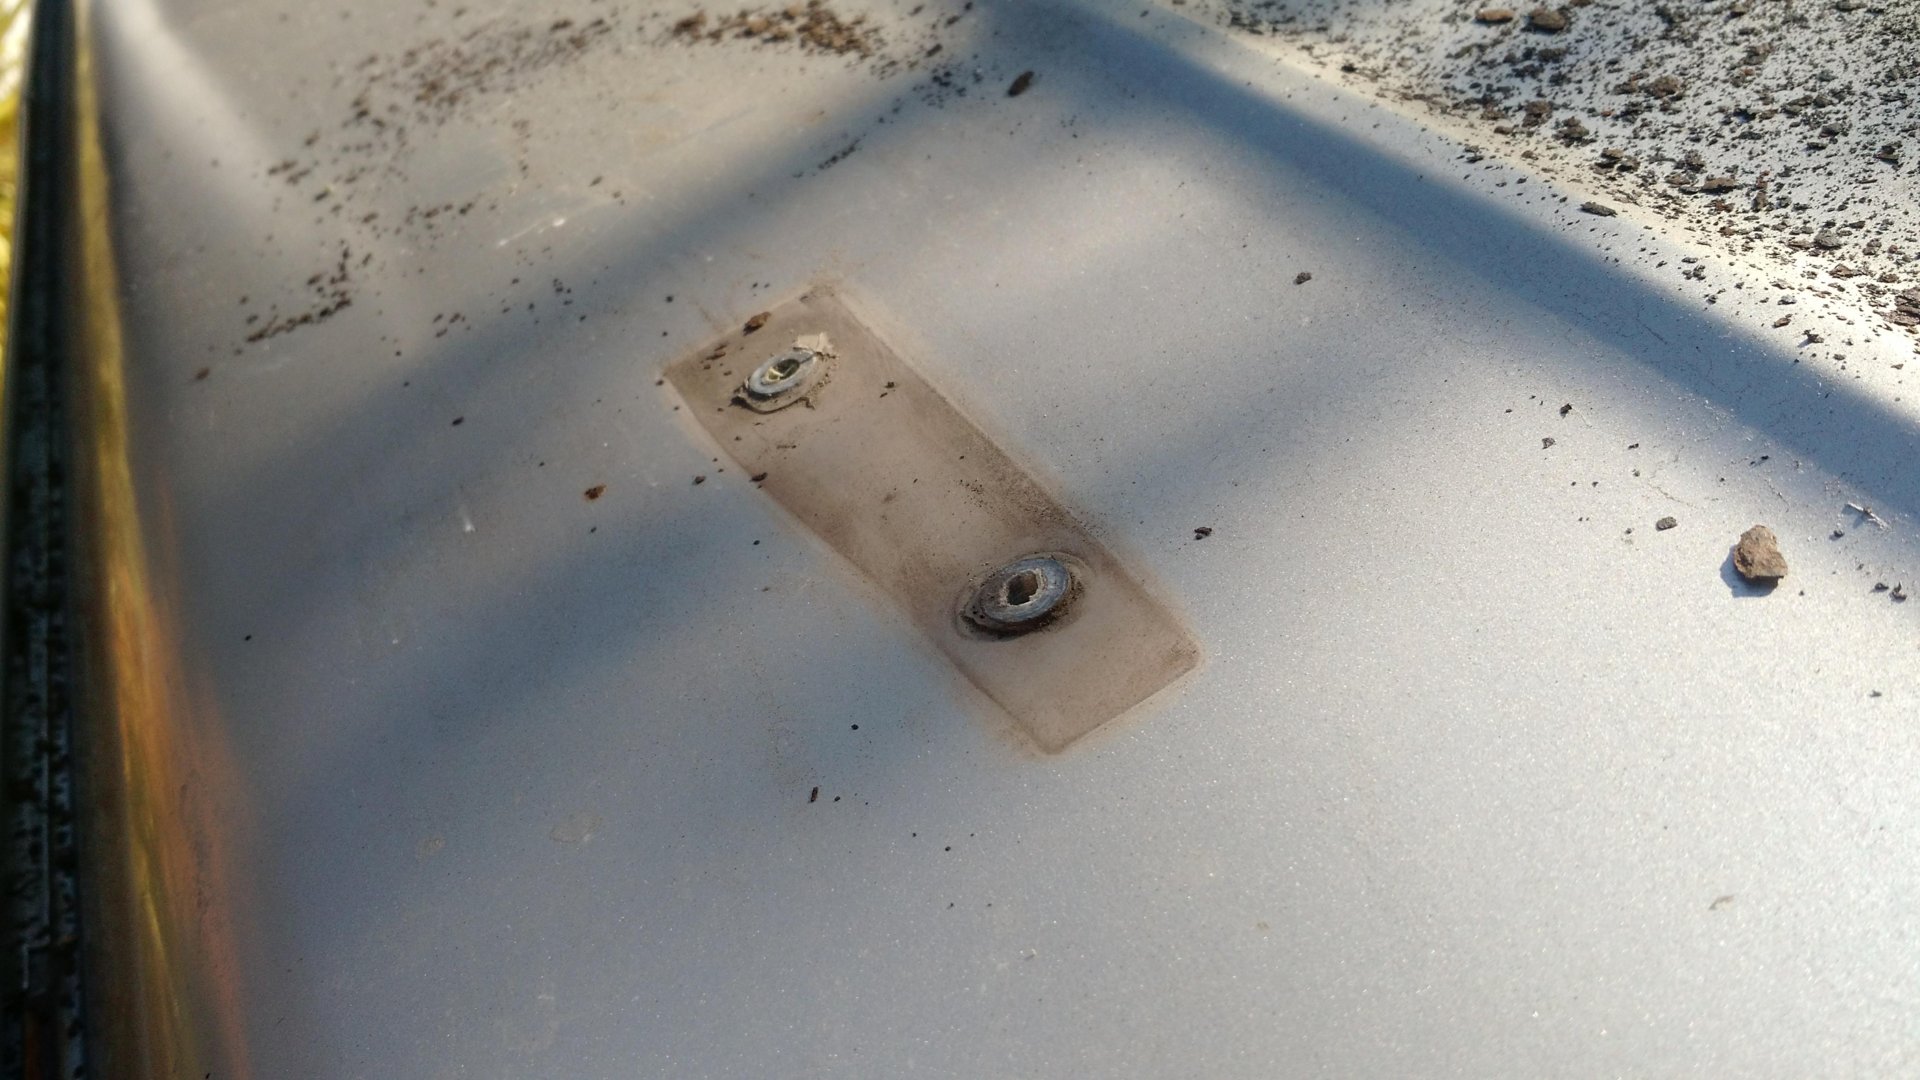 OEM Roof Racks ? and Roof Rack Hole Sealant Suggestions | IH8MUD Forum How To Plug Old Screw Holes In Metal Roofing